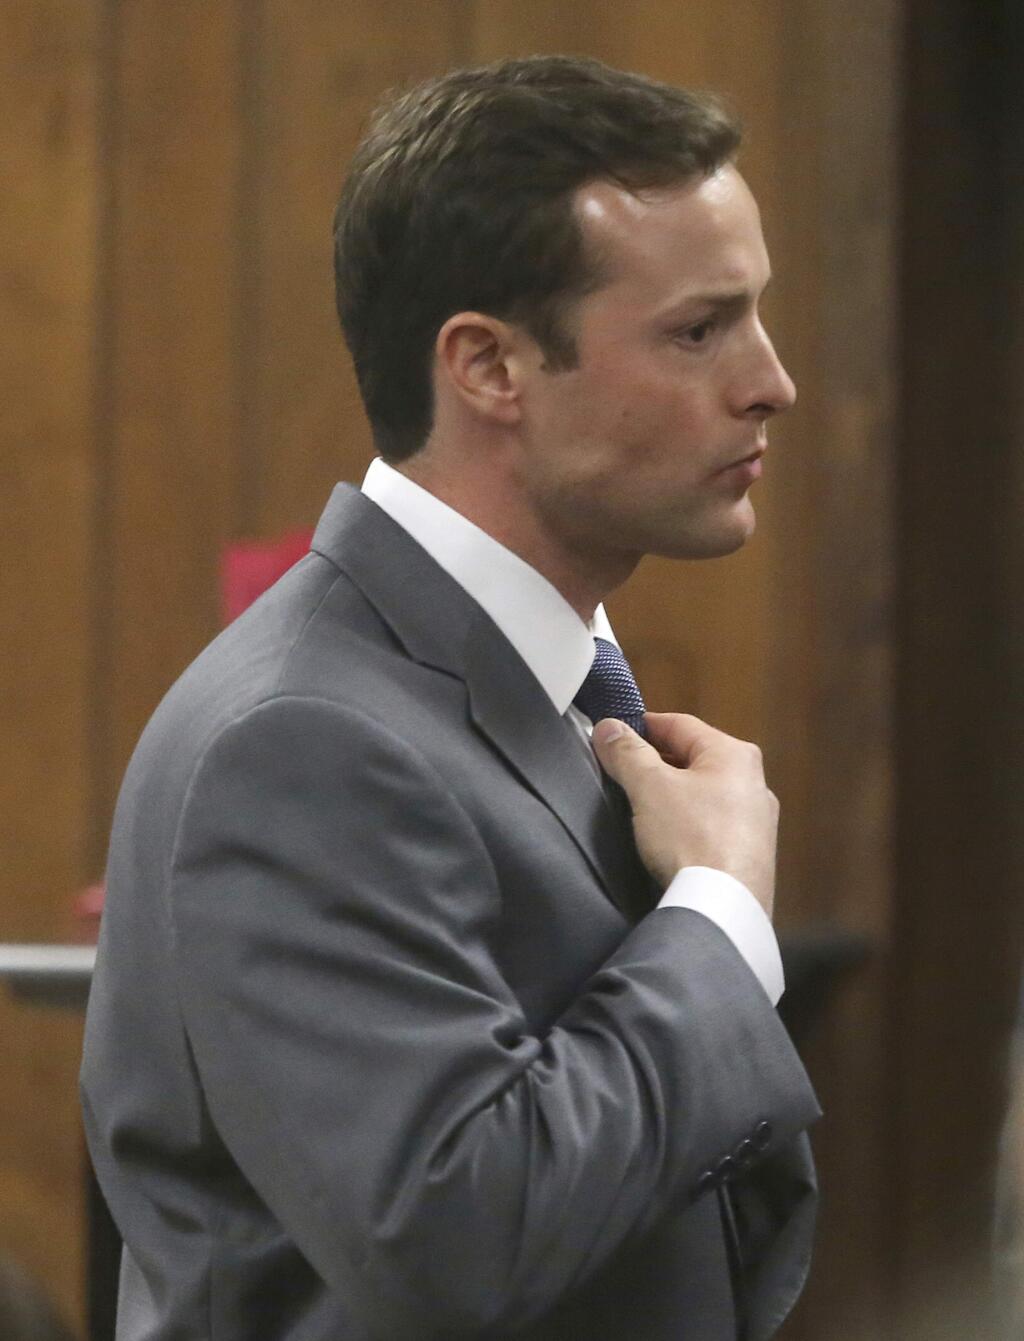 Former Baylor University fraternity president Jacob Anderson adjust his tie in the courtroom Monday Dec. 10, 2018 in Waco, Texas. Mr. Anderson, accused of rape, will serve no jail time after a Waco district judge accepted a plea bargain for deferred probation. (Jerry Larson/Waco Tribune Herald via AP)